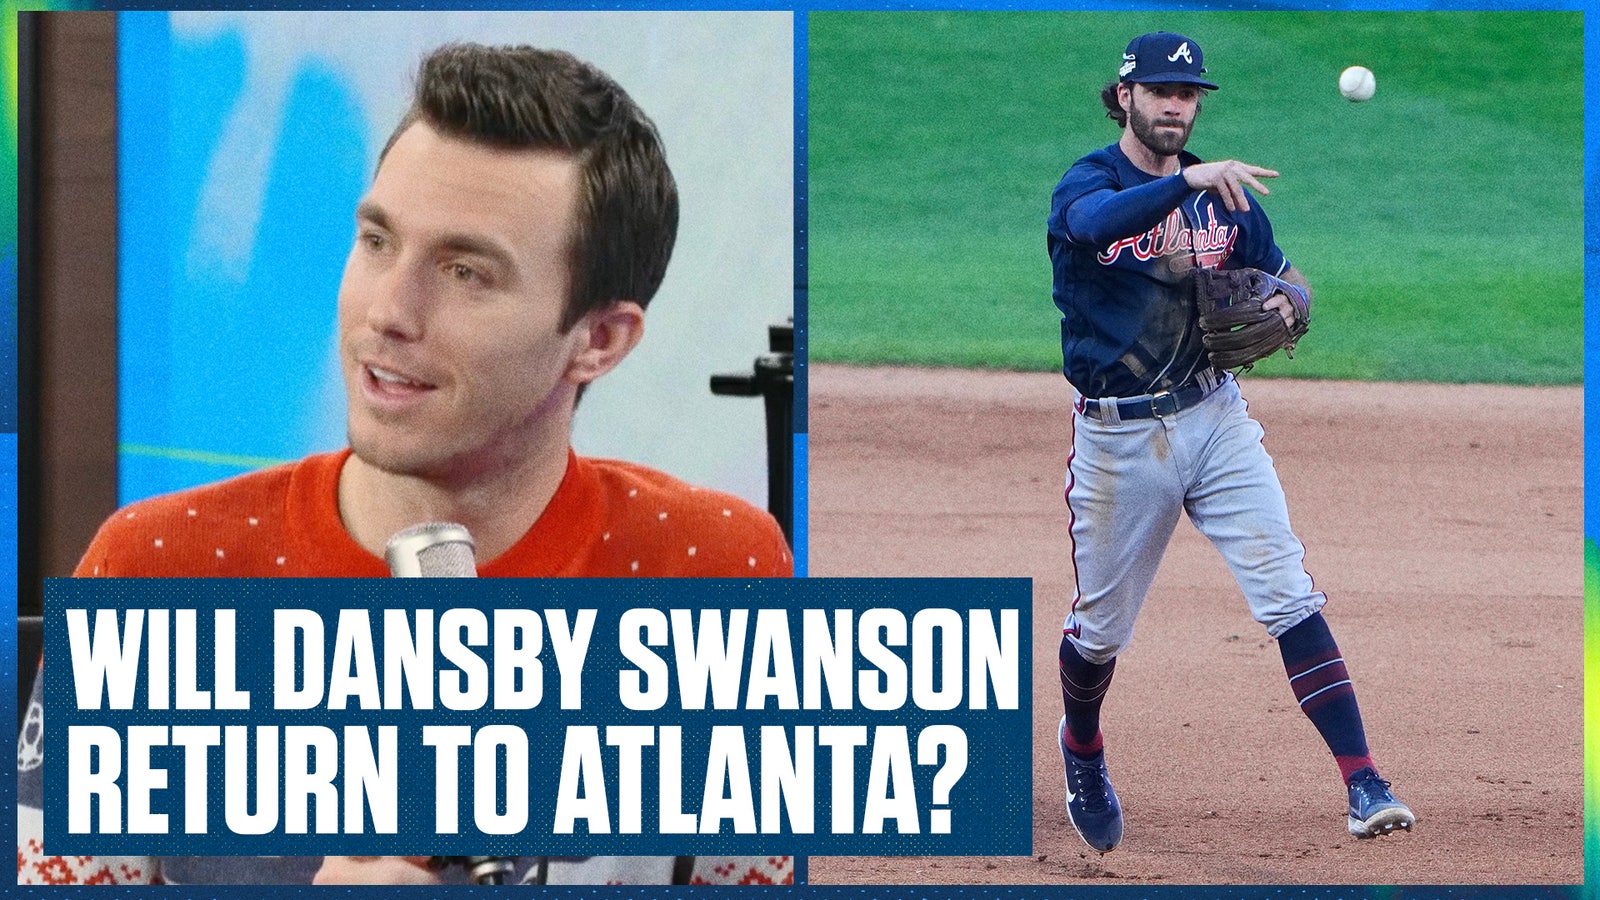 Will the Braves re-sign Dansby Swanson?